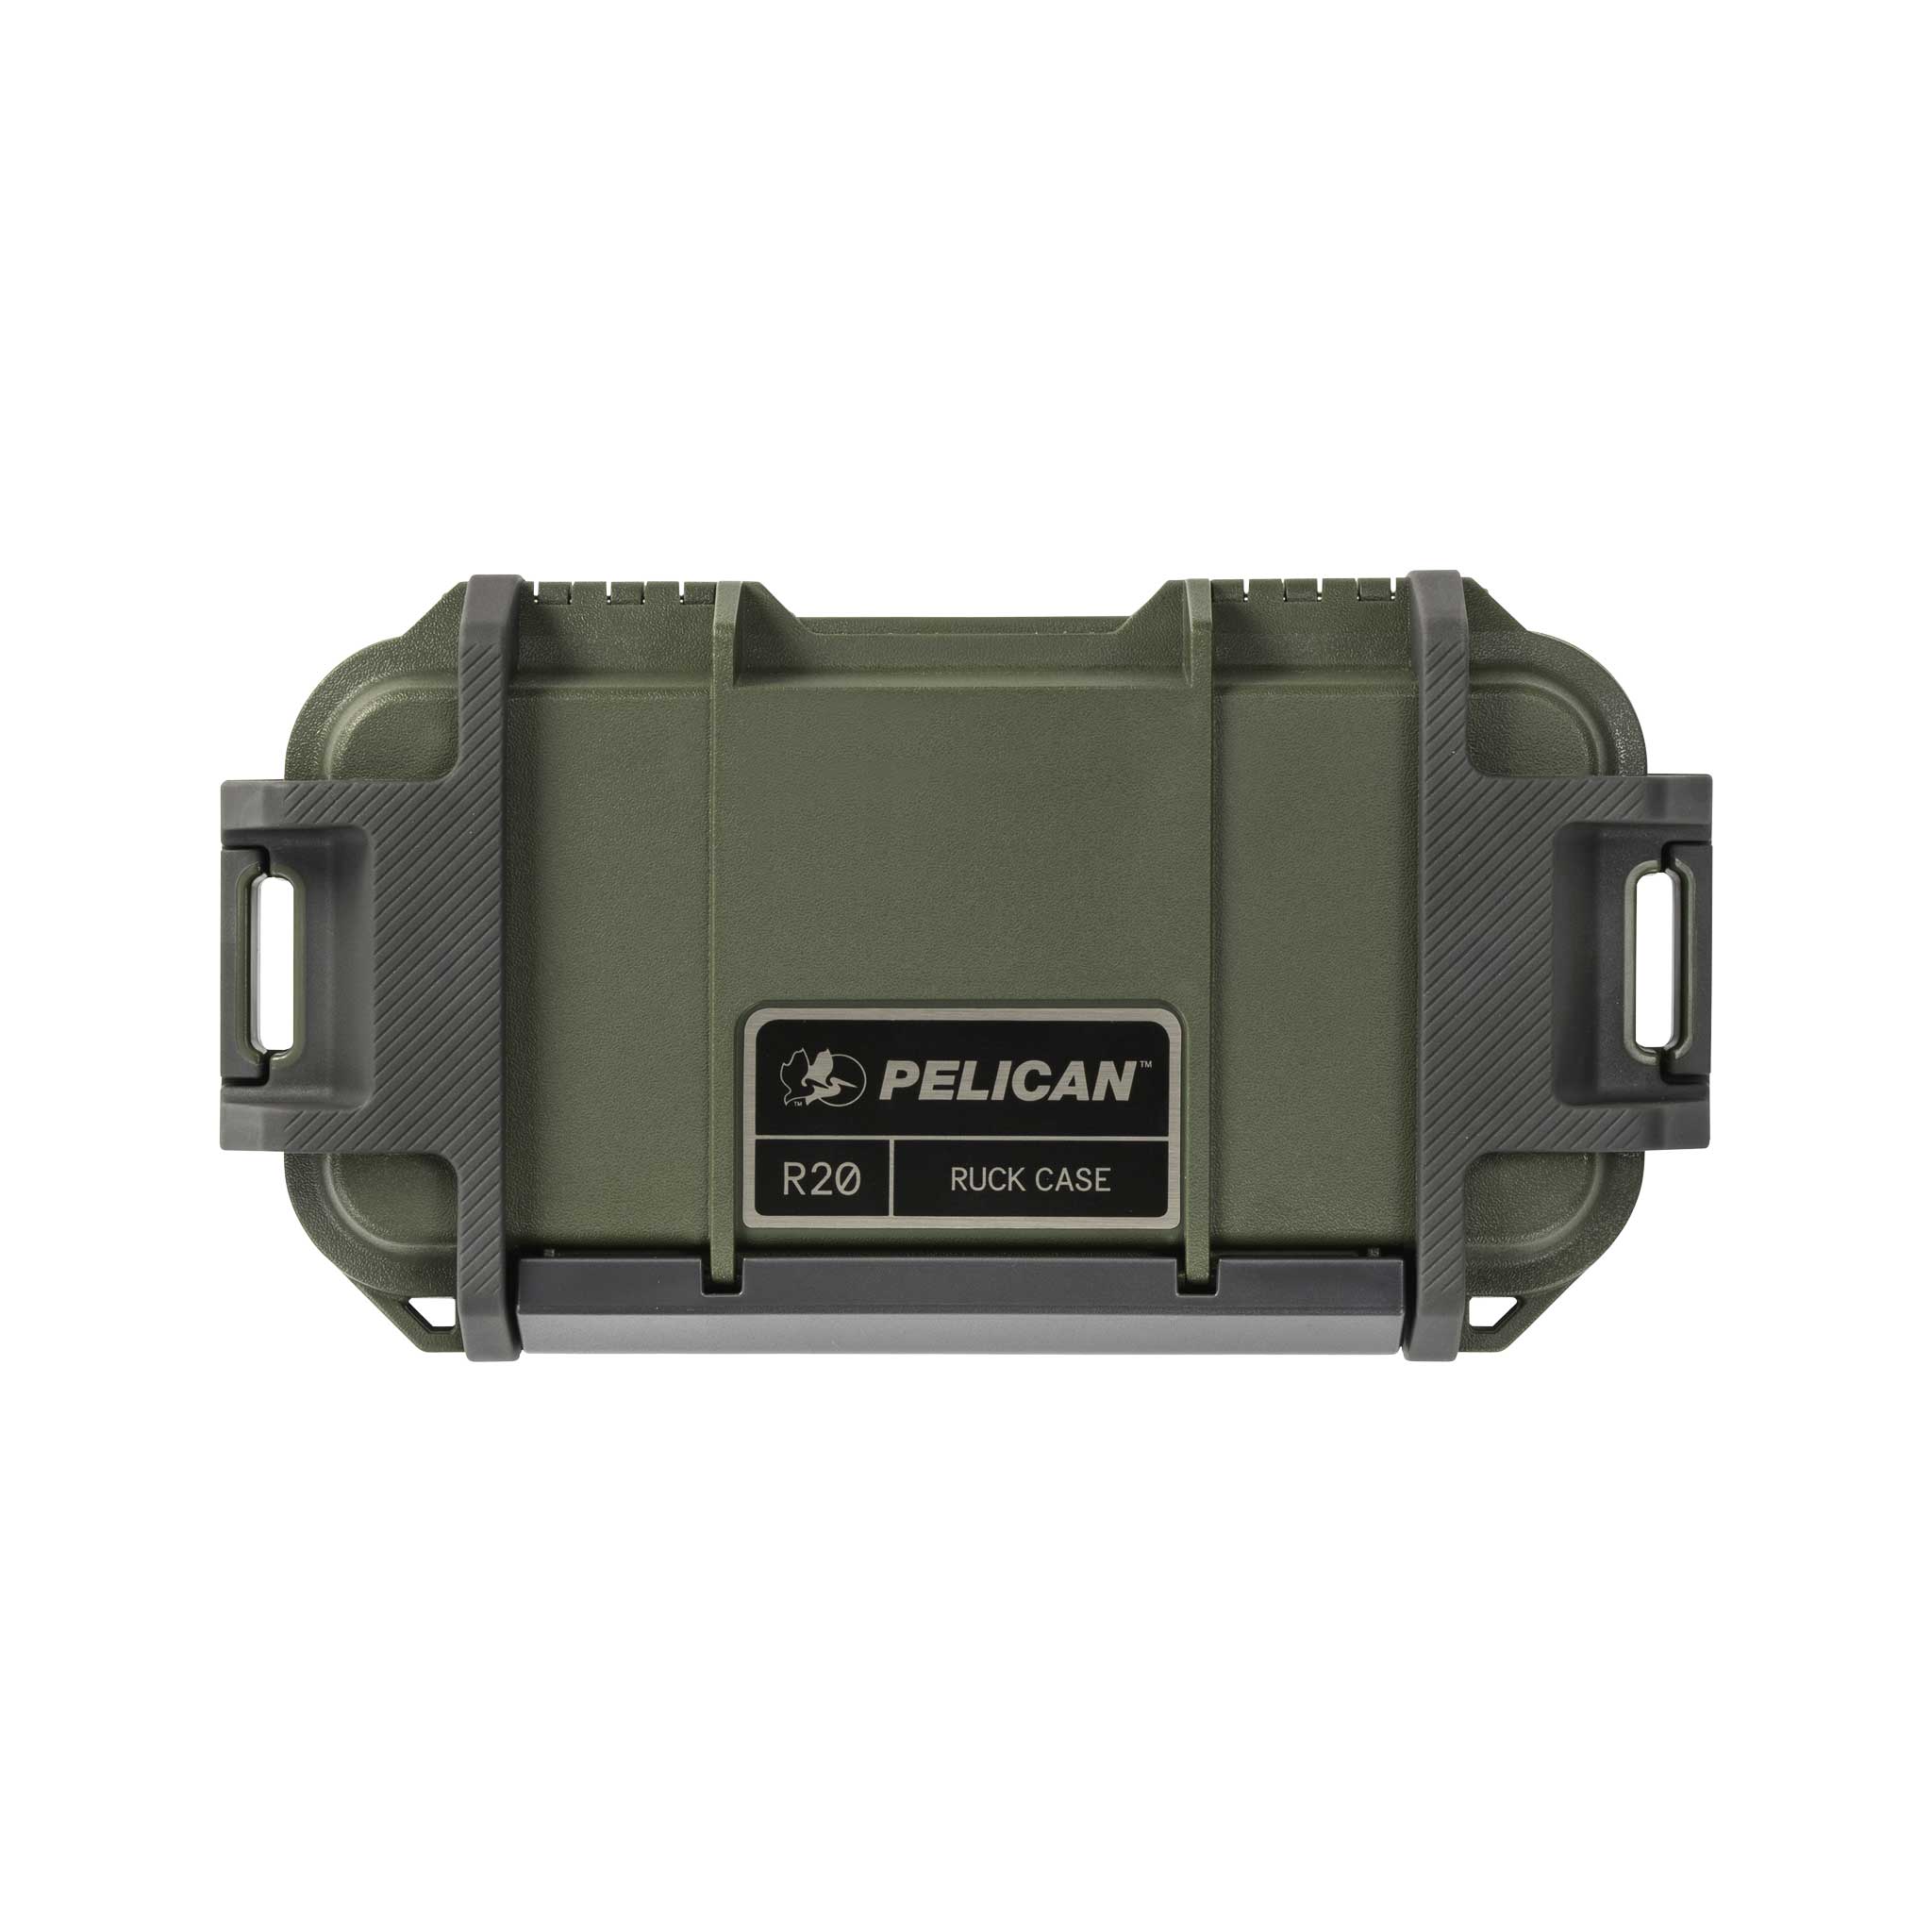 R20 Person Utility Ruck Case